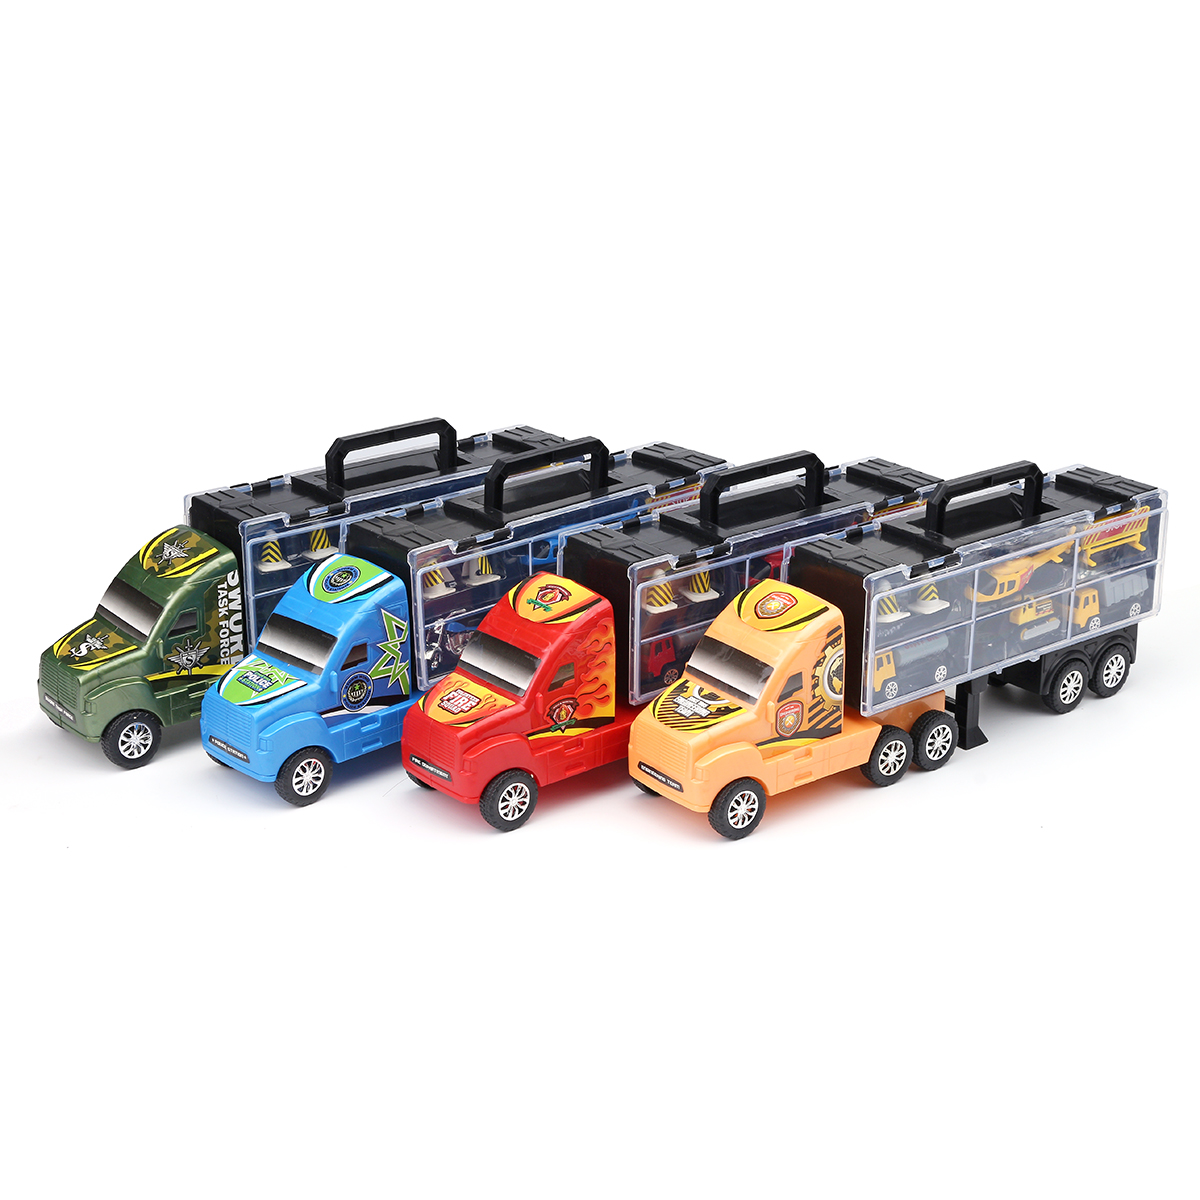 Alloy-Trailer-Container-Car-Storage-Box-Diecast-Car-Model-Set-Toy-for-Childrens-Gift-1635959-1